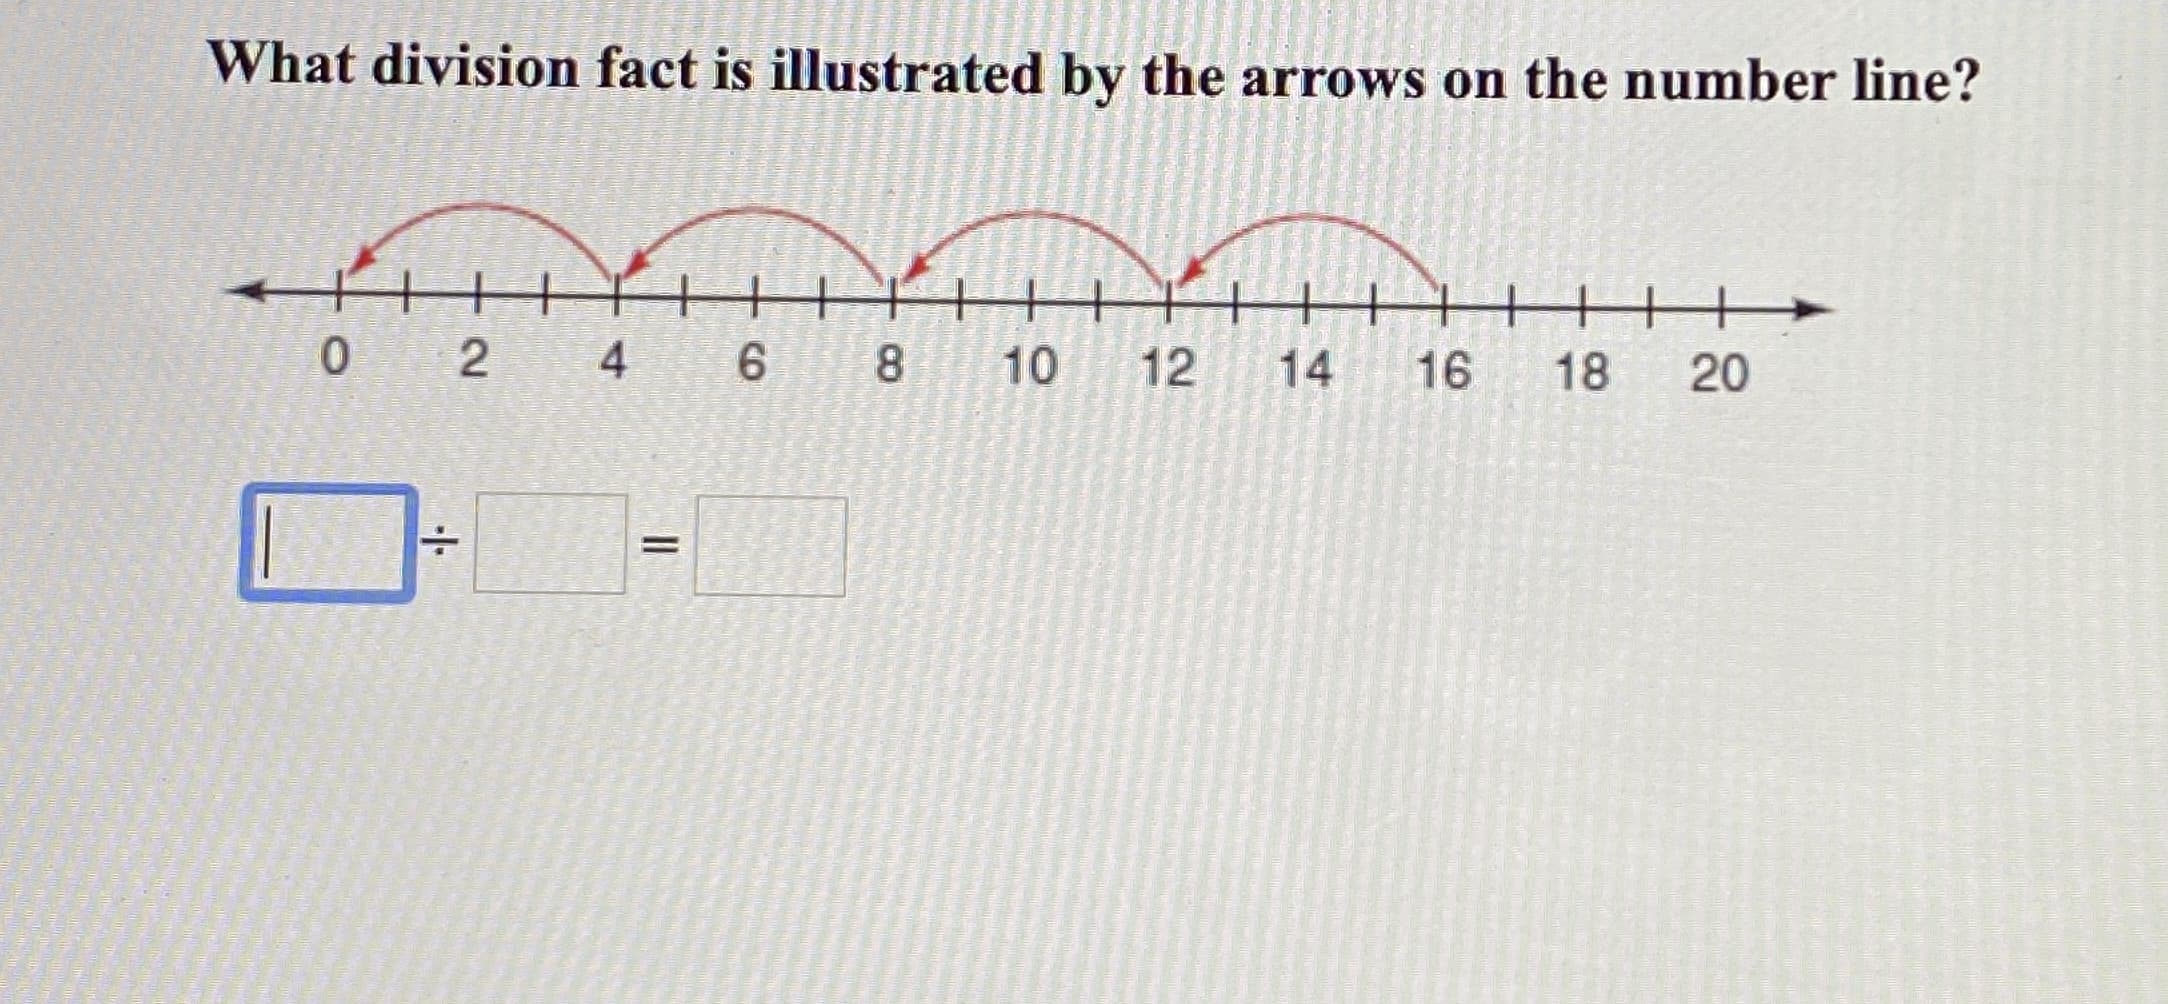 What division fact is illustrated by the arrows on the number line?
+
0 2 4
8 10
12
14
16
18
20
